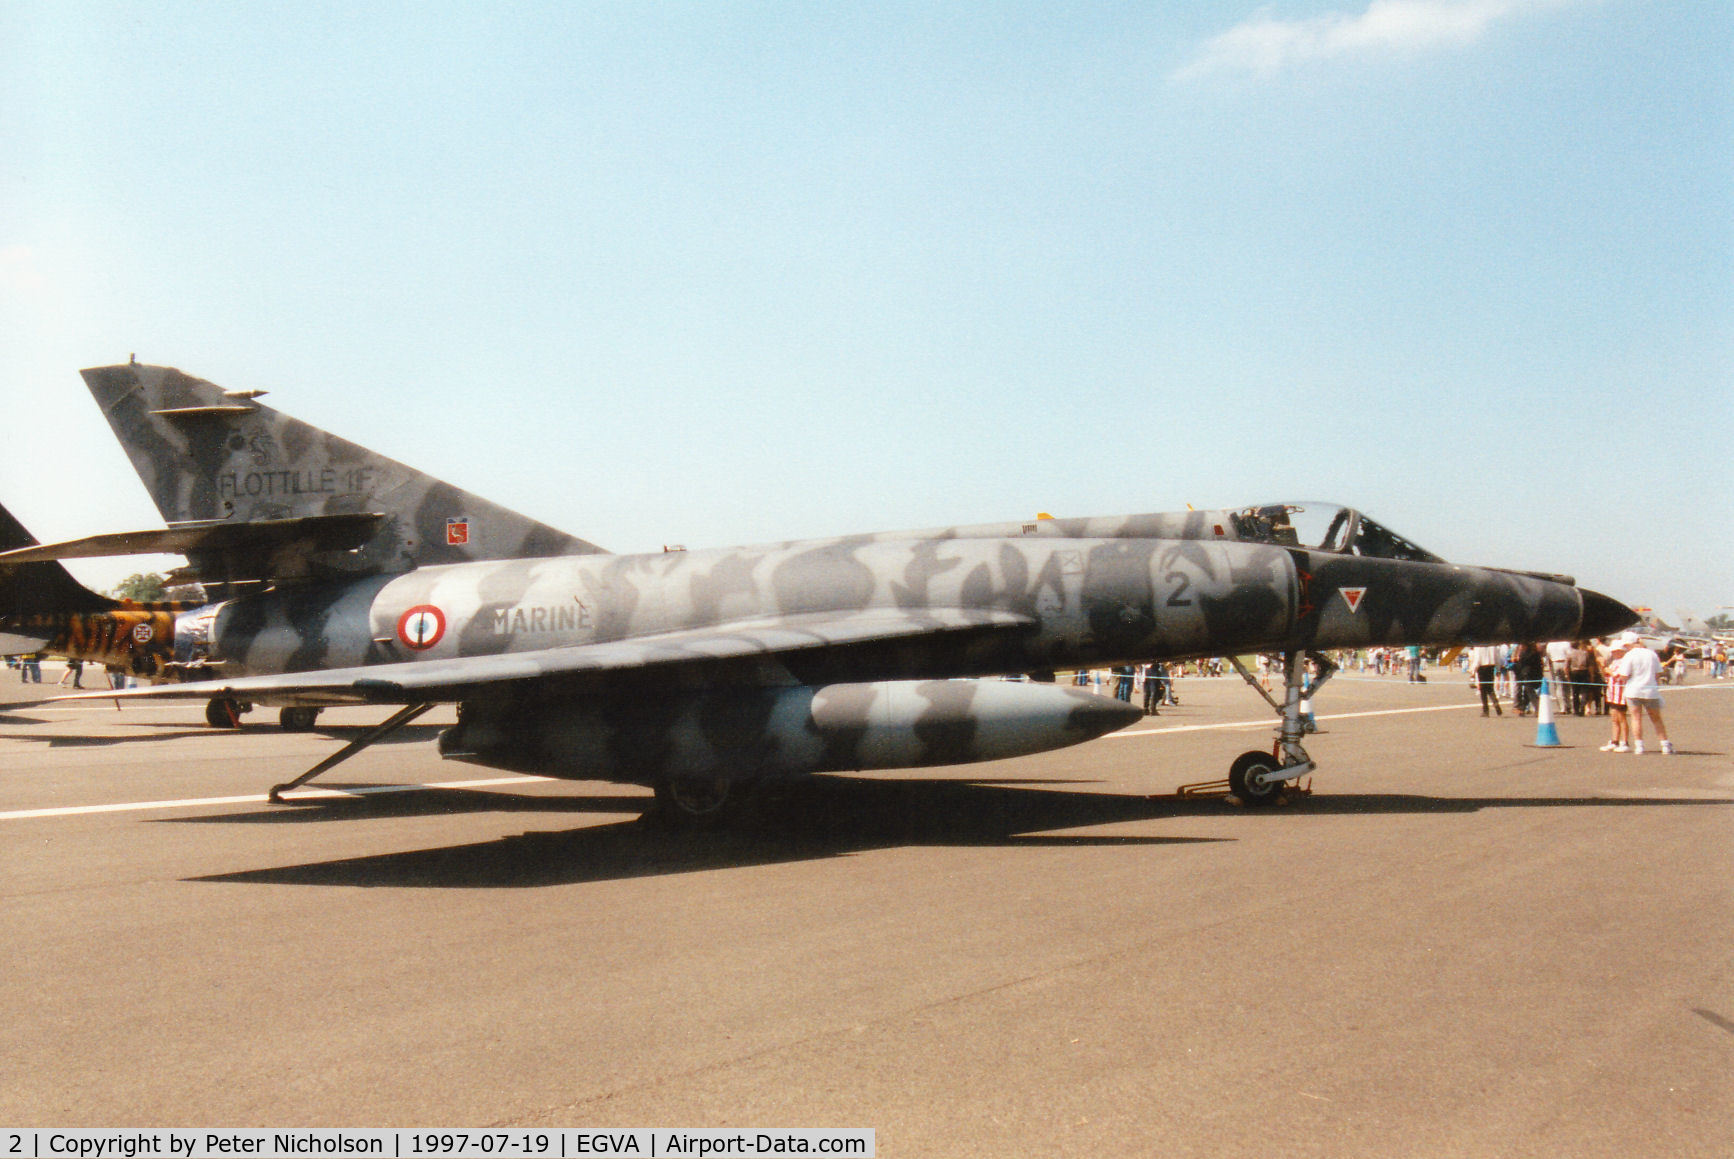 2, Dassault Super Etendard C/N 2, Another view of the 11 Flotille Super Etendard of the French Aeronavale on display at the 1997 Intnl Air Tattoo at RAF Fairford.